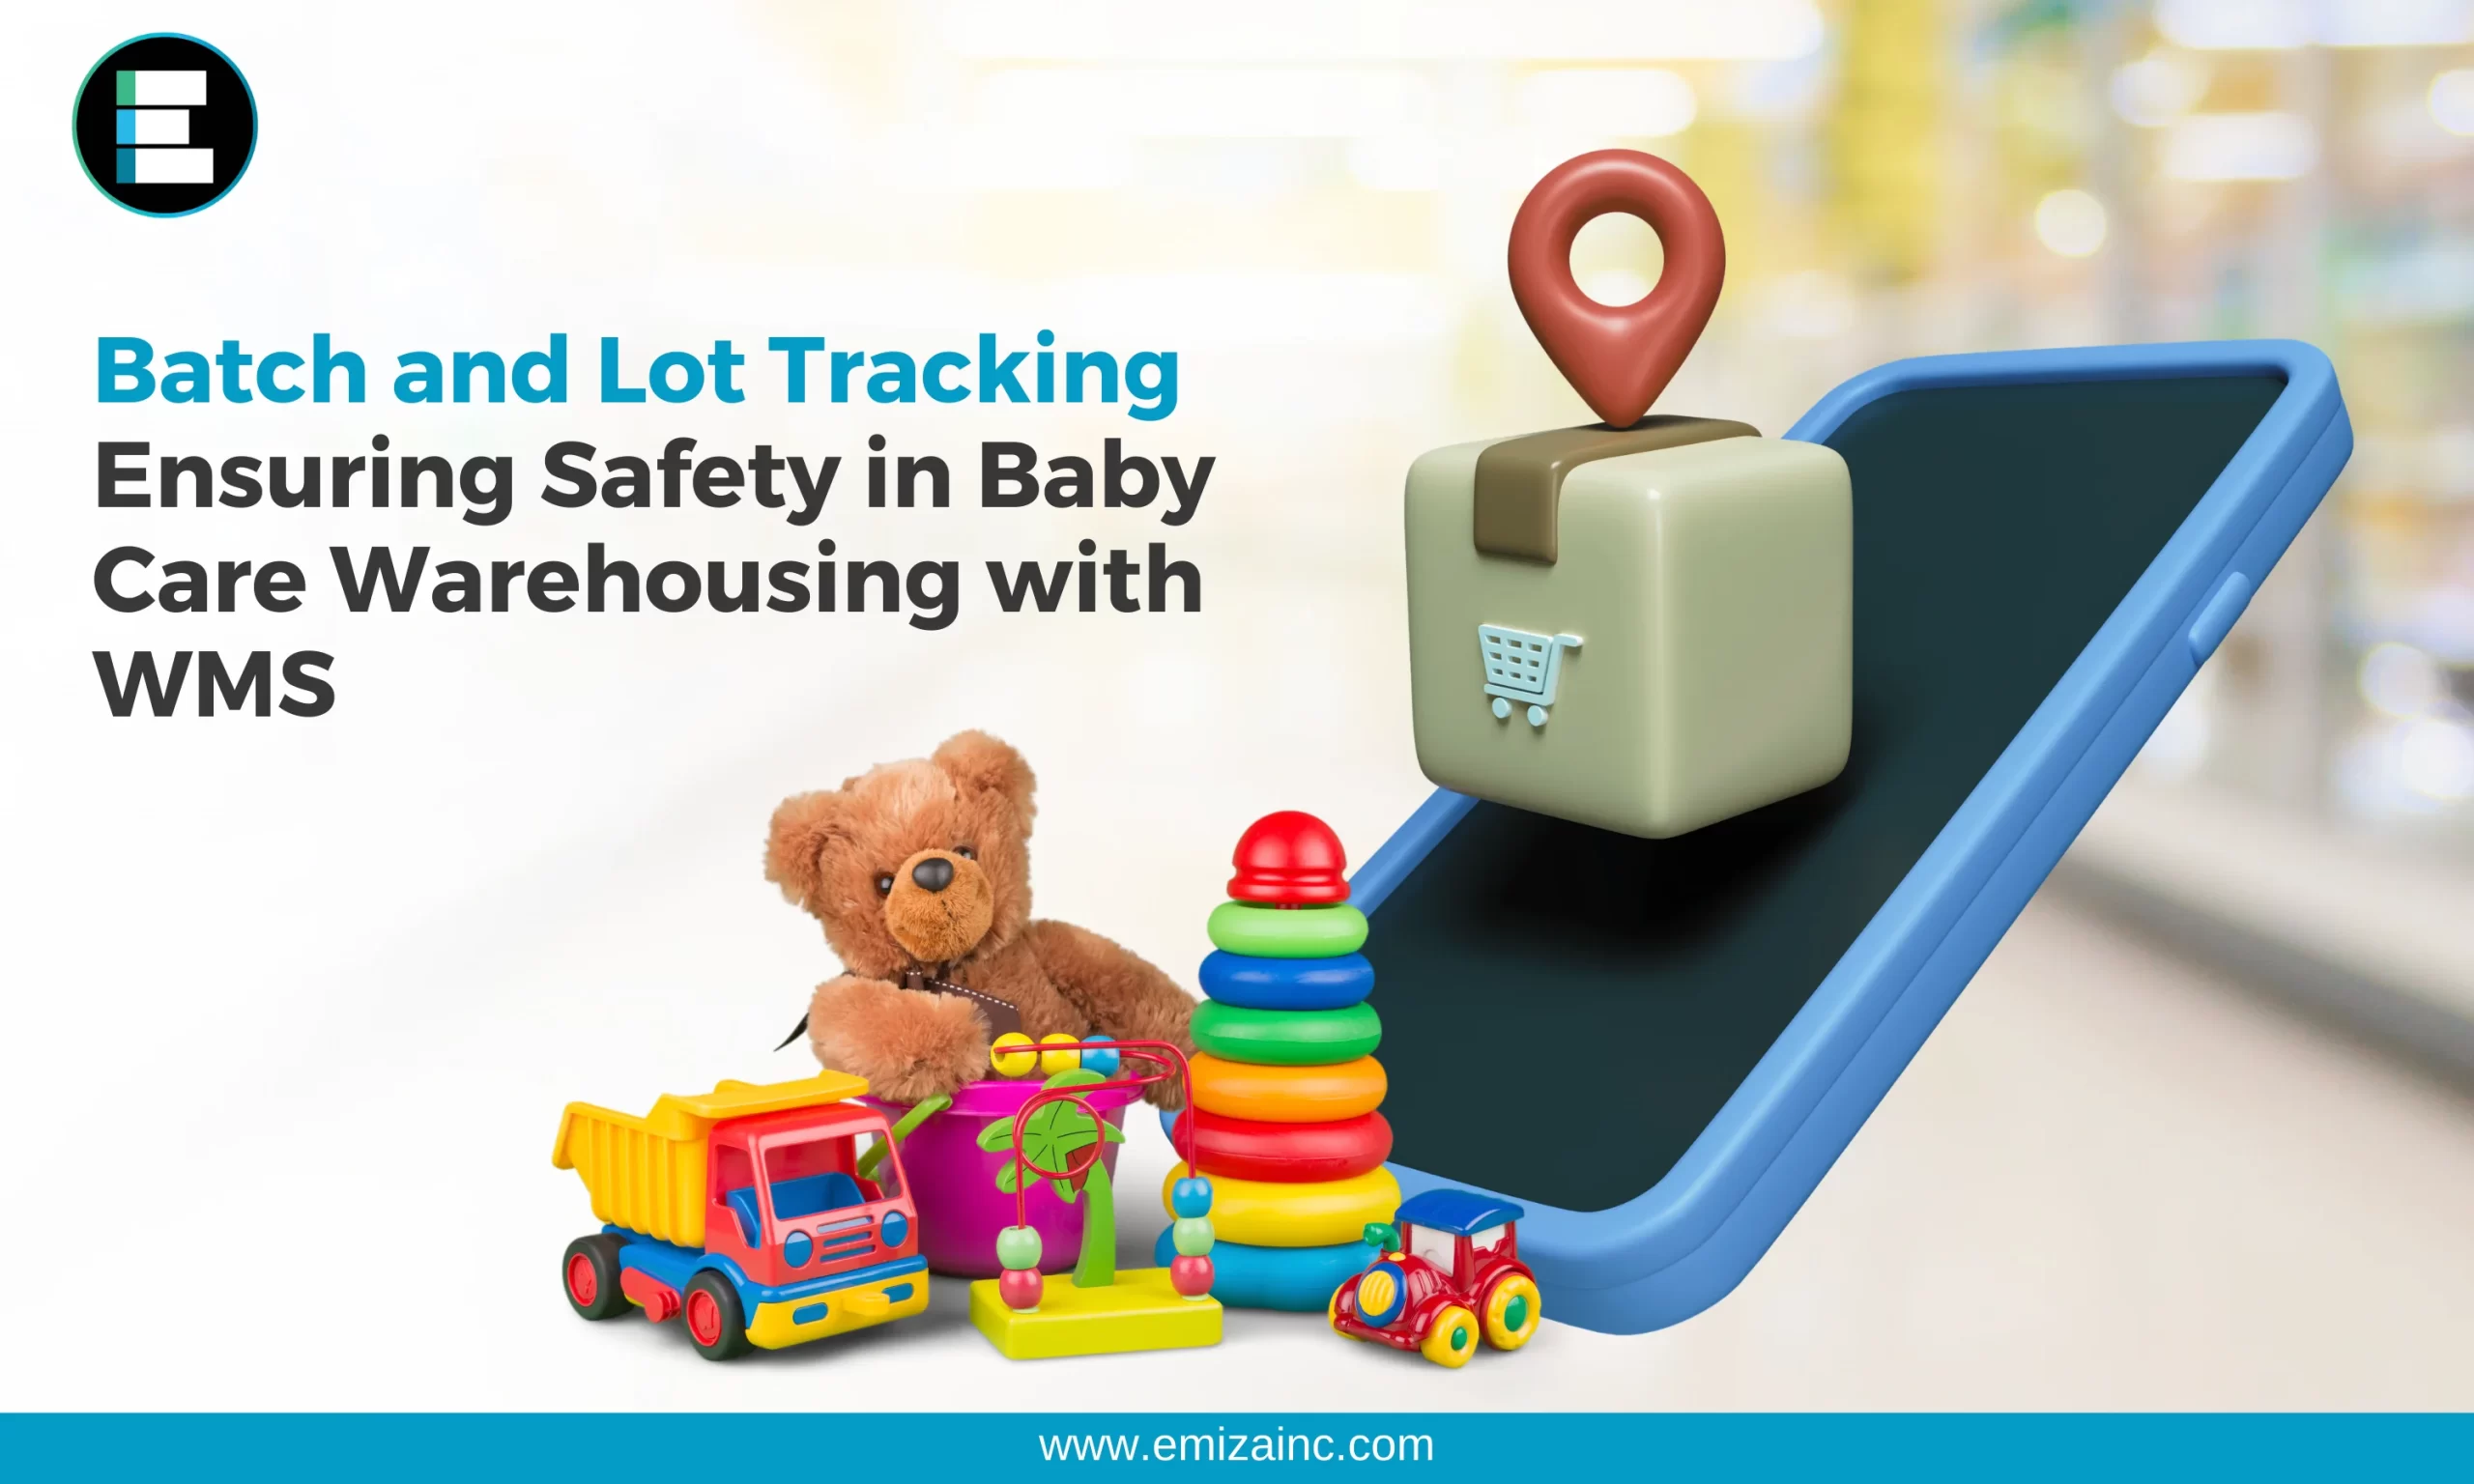 Batch and Lot Tracking: Ensuring Safety in Baby Care Warehousing with WMS